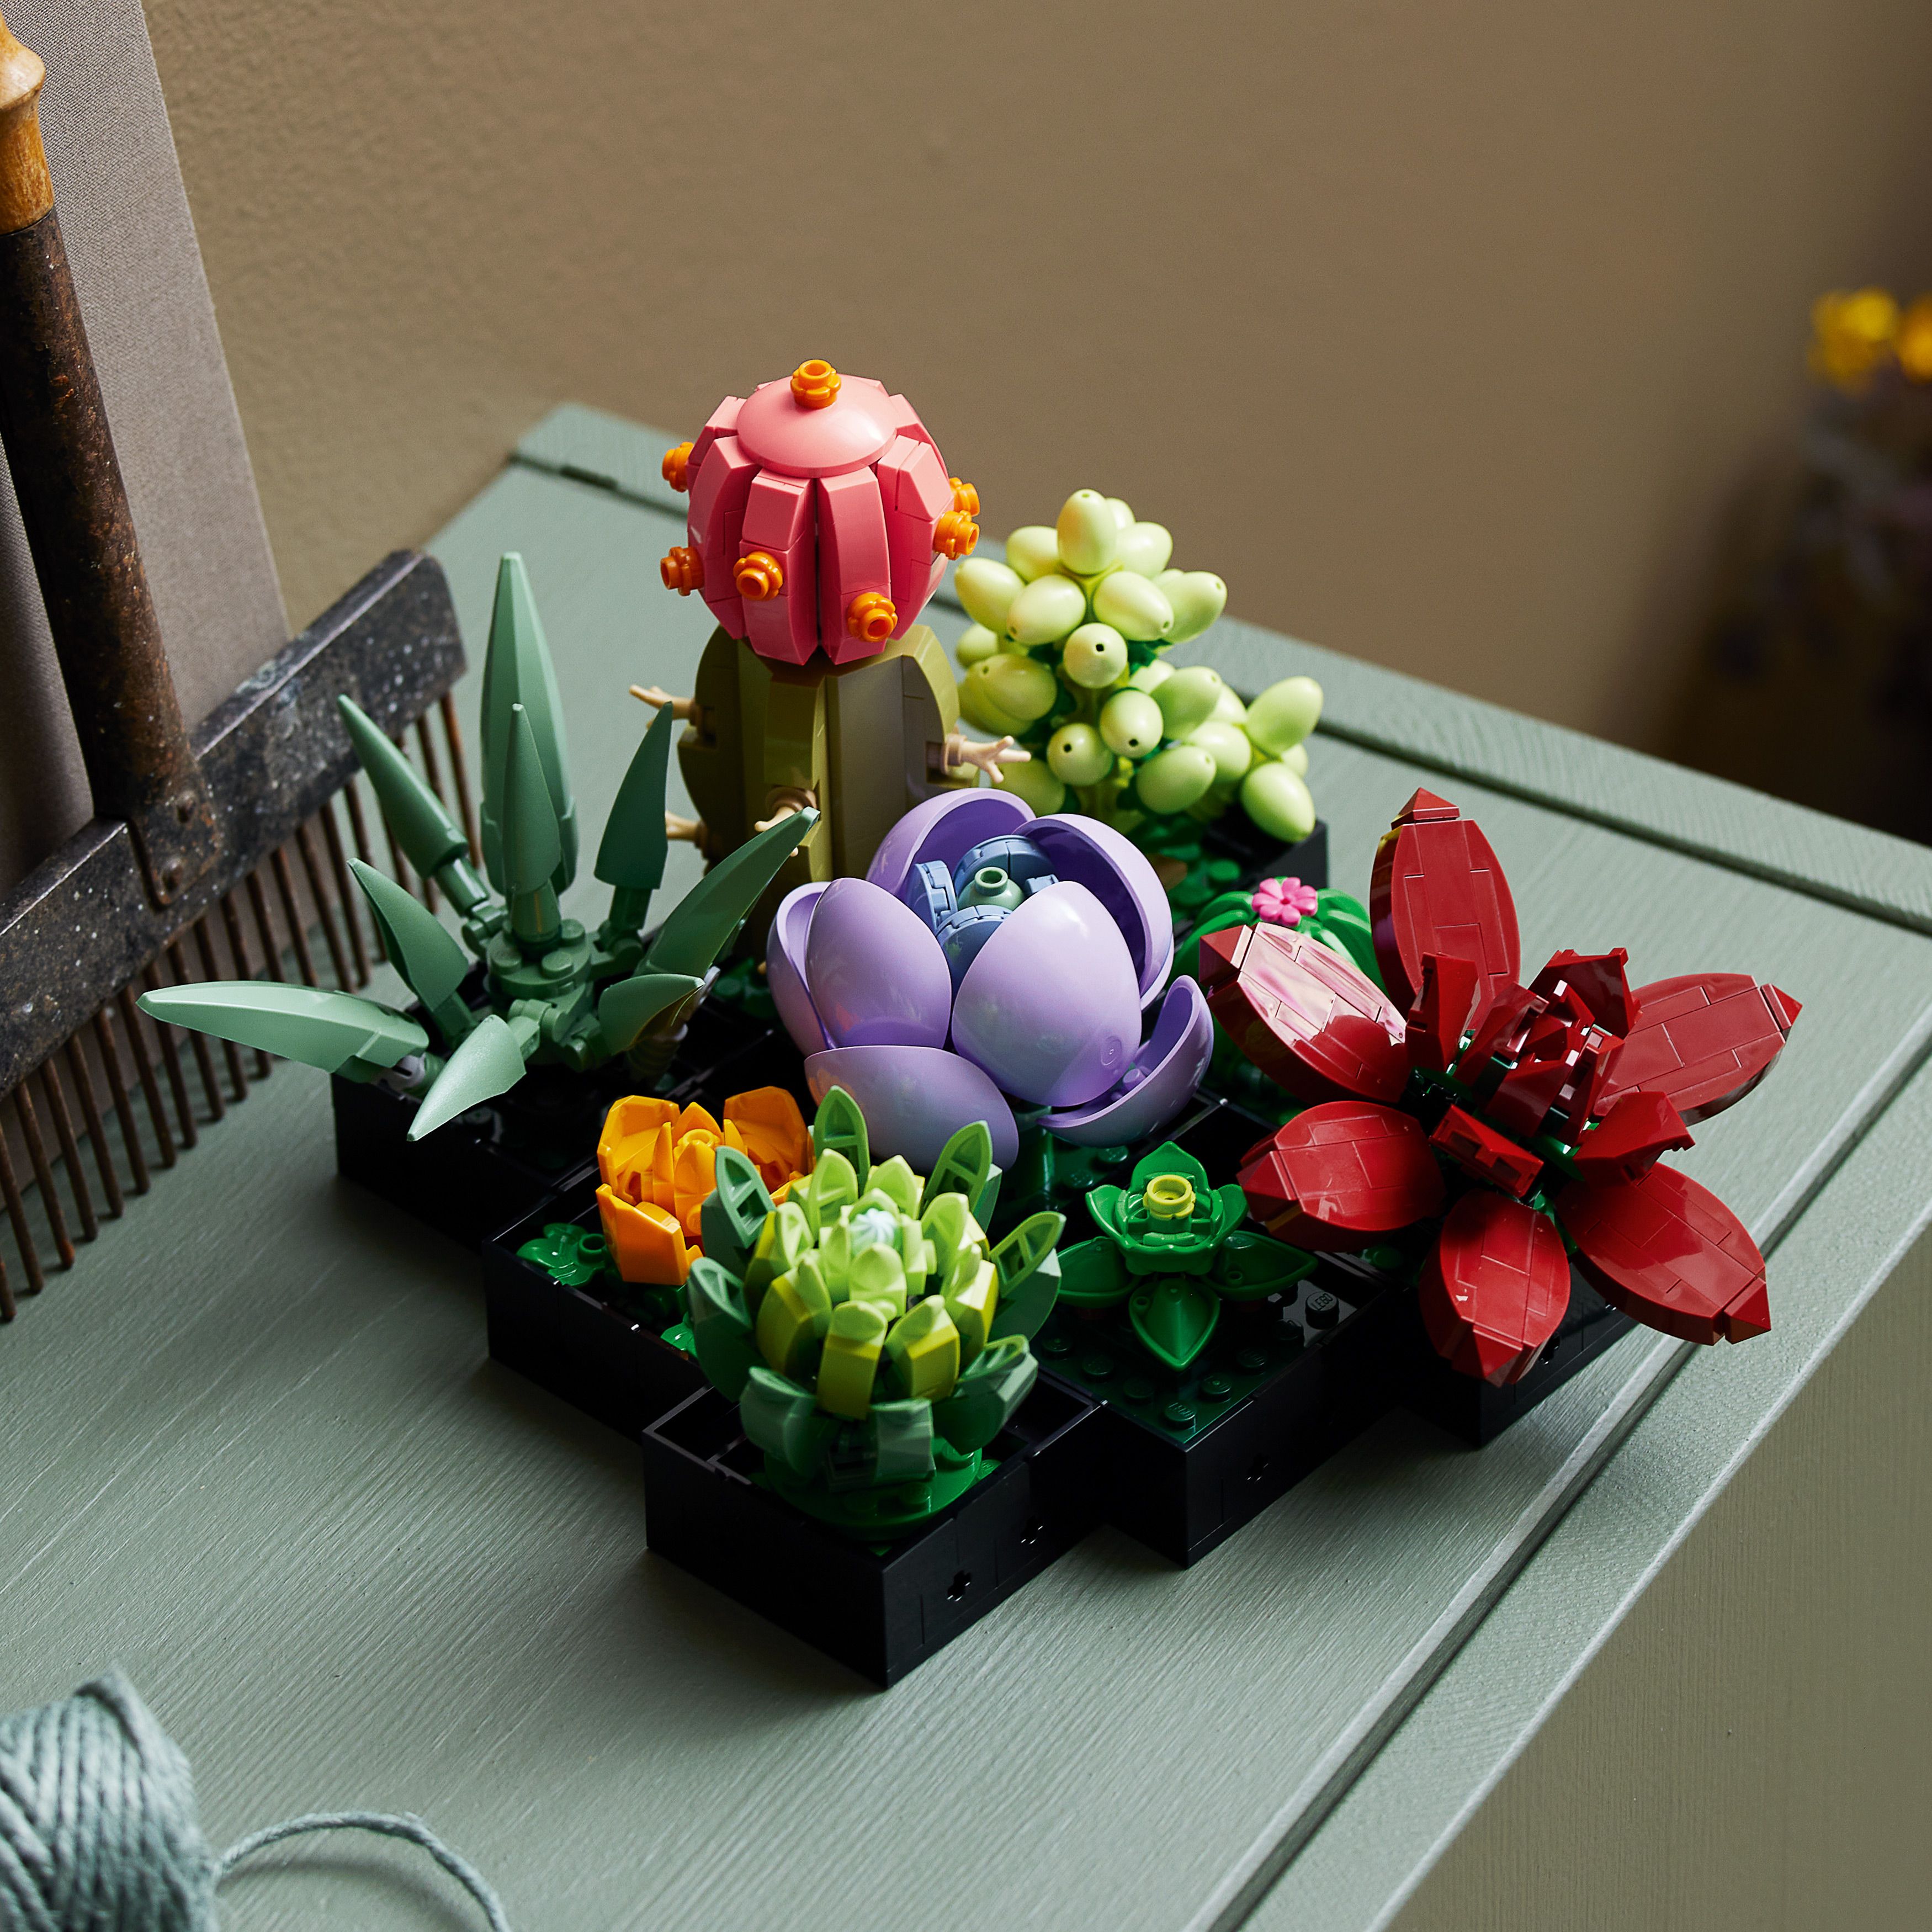 Lego Flower Collection Includes an Orchid and Succulents - Lego Flowers